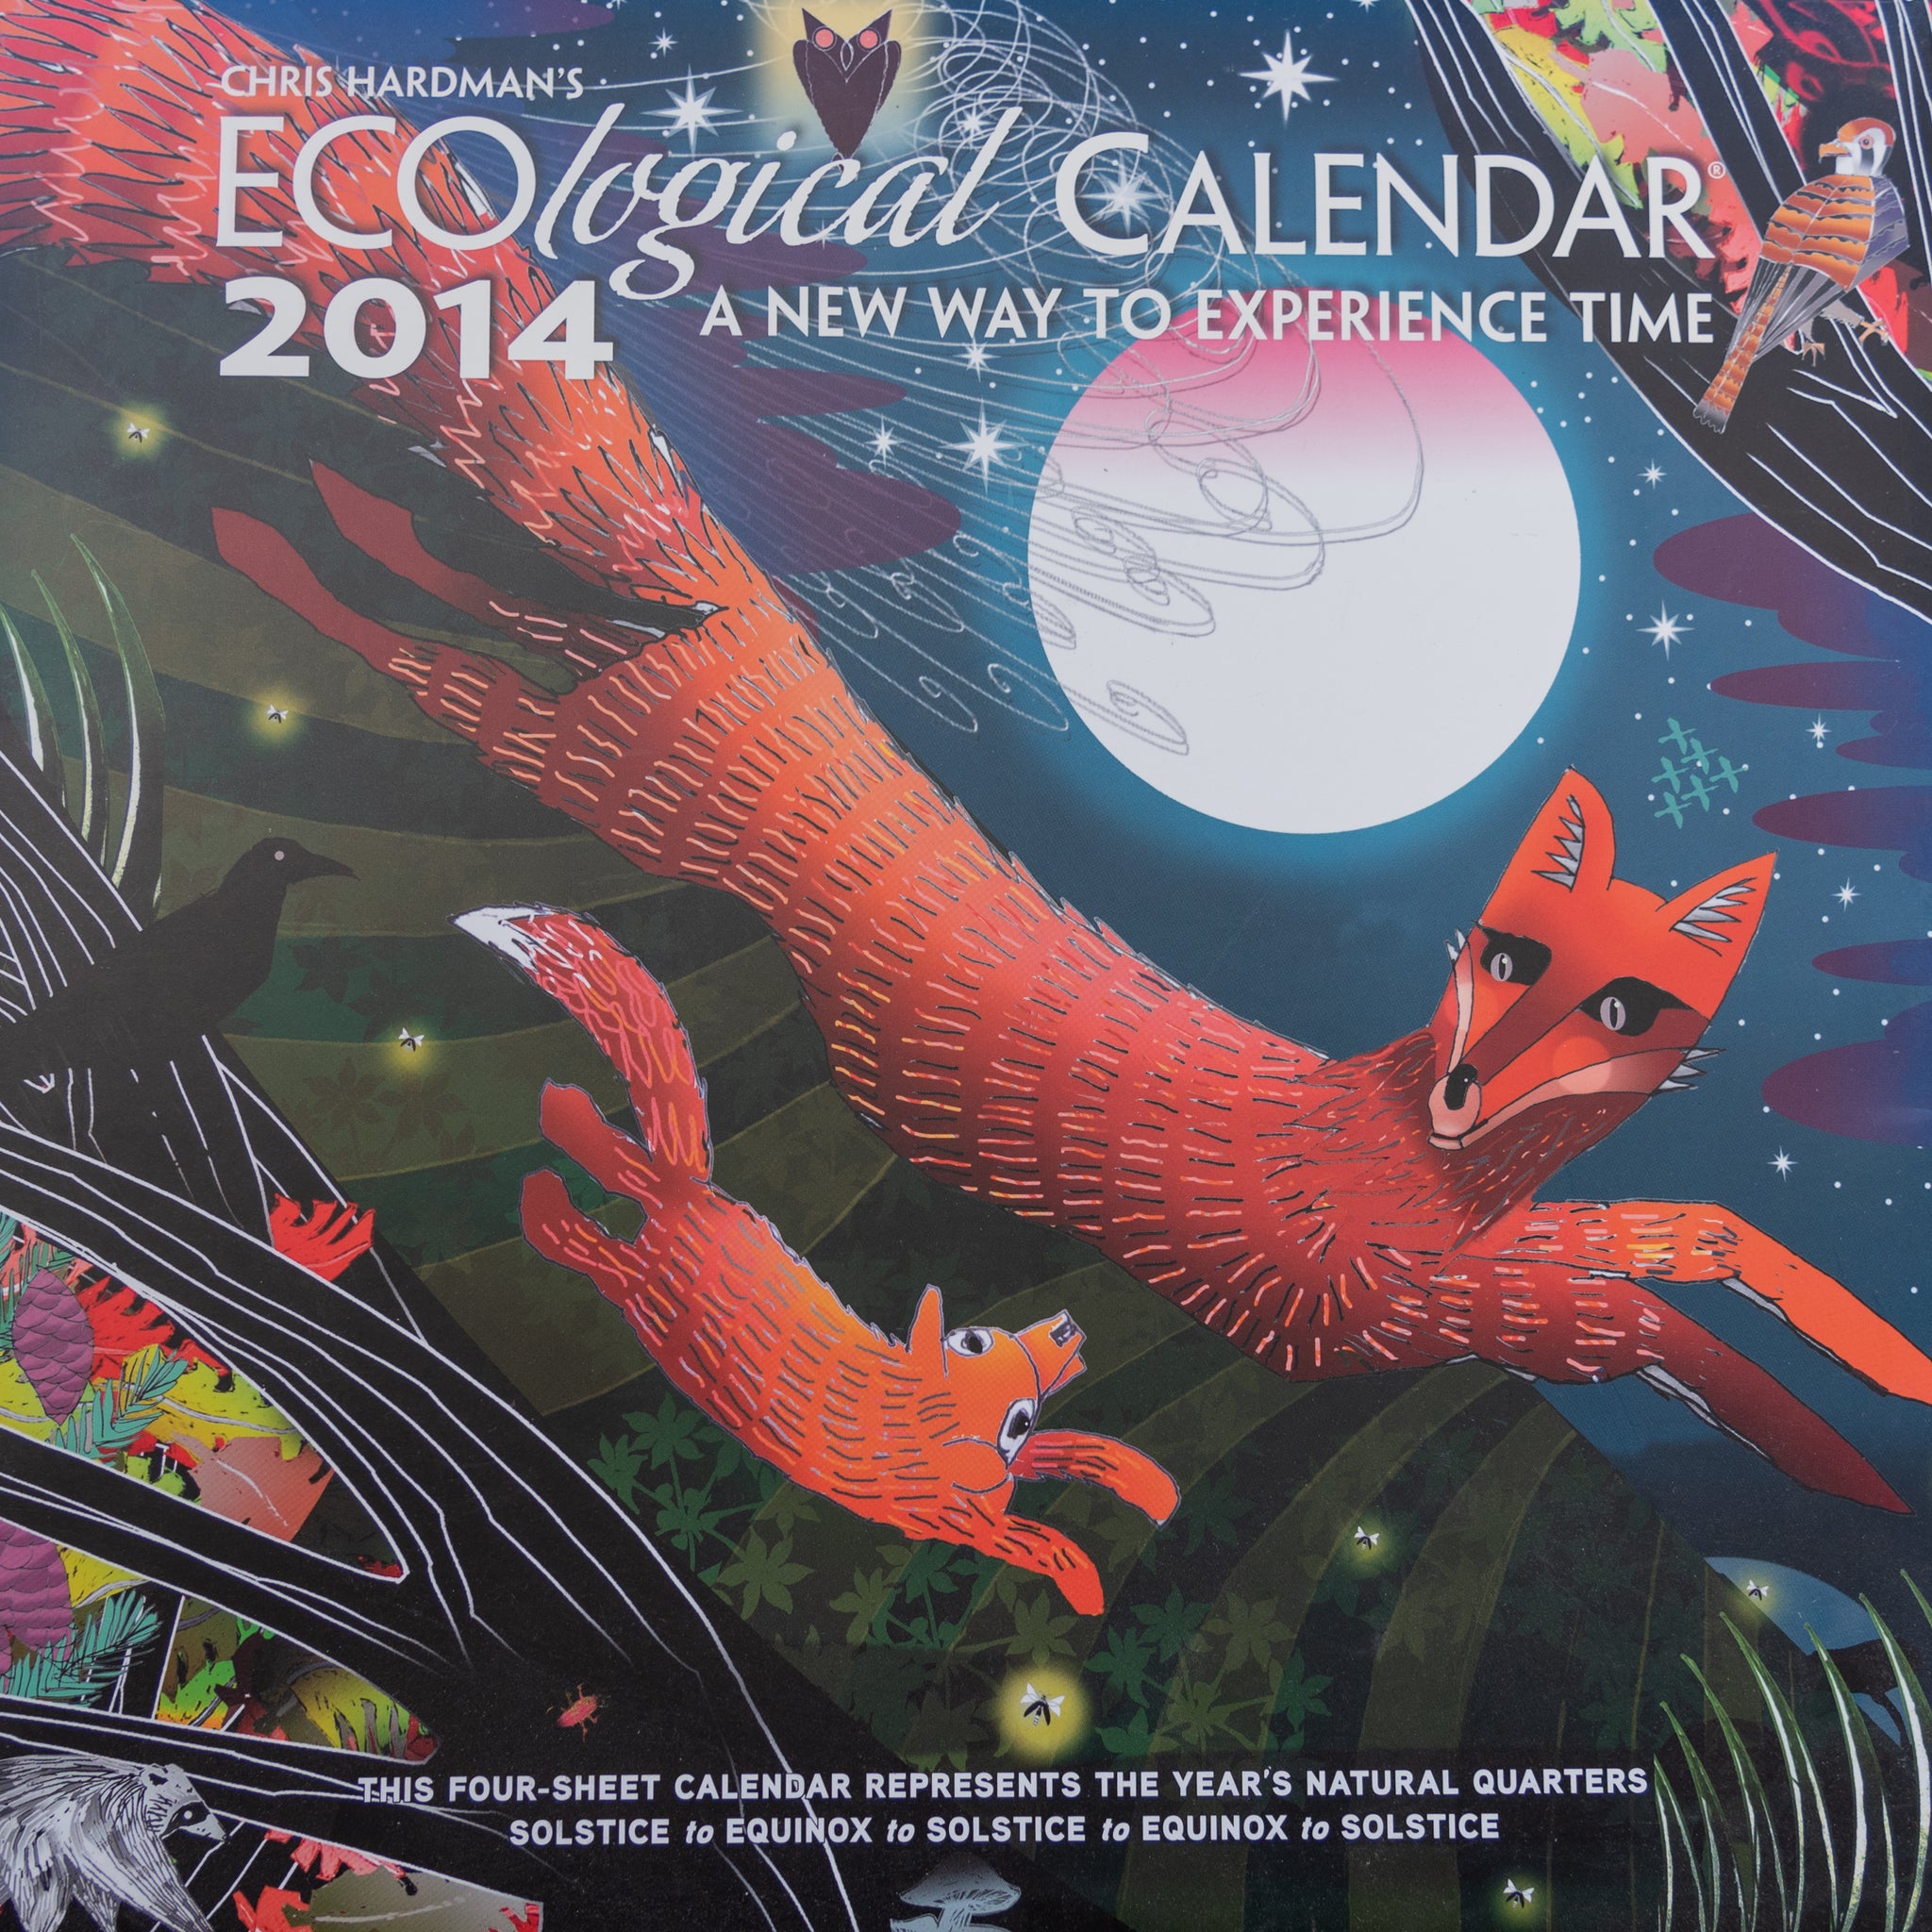 SOLD OUT!! Complete set of All ECOlogical Calendars 2005 2021, FREE S